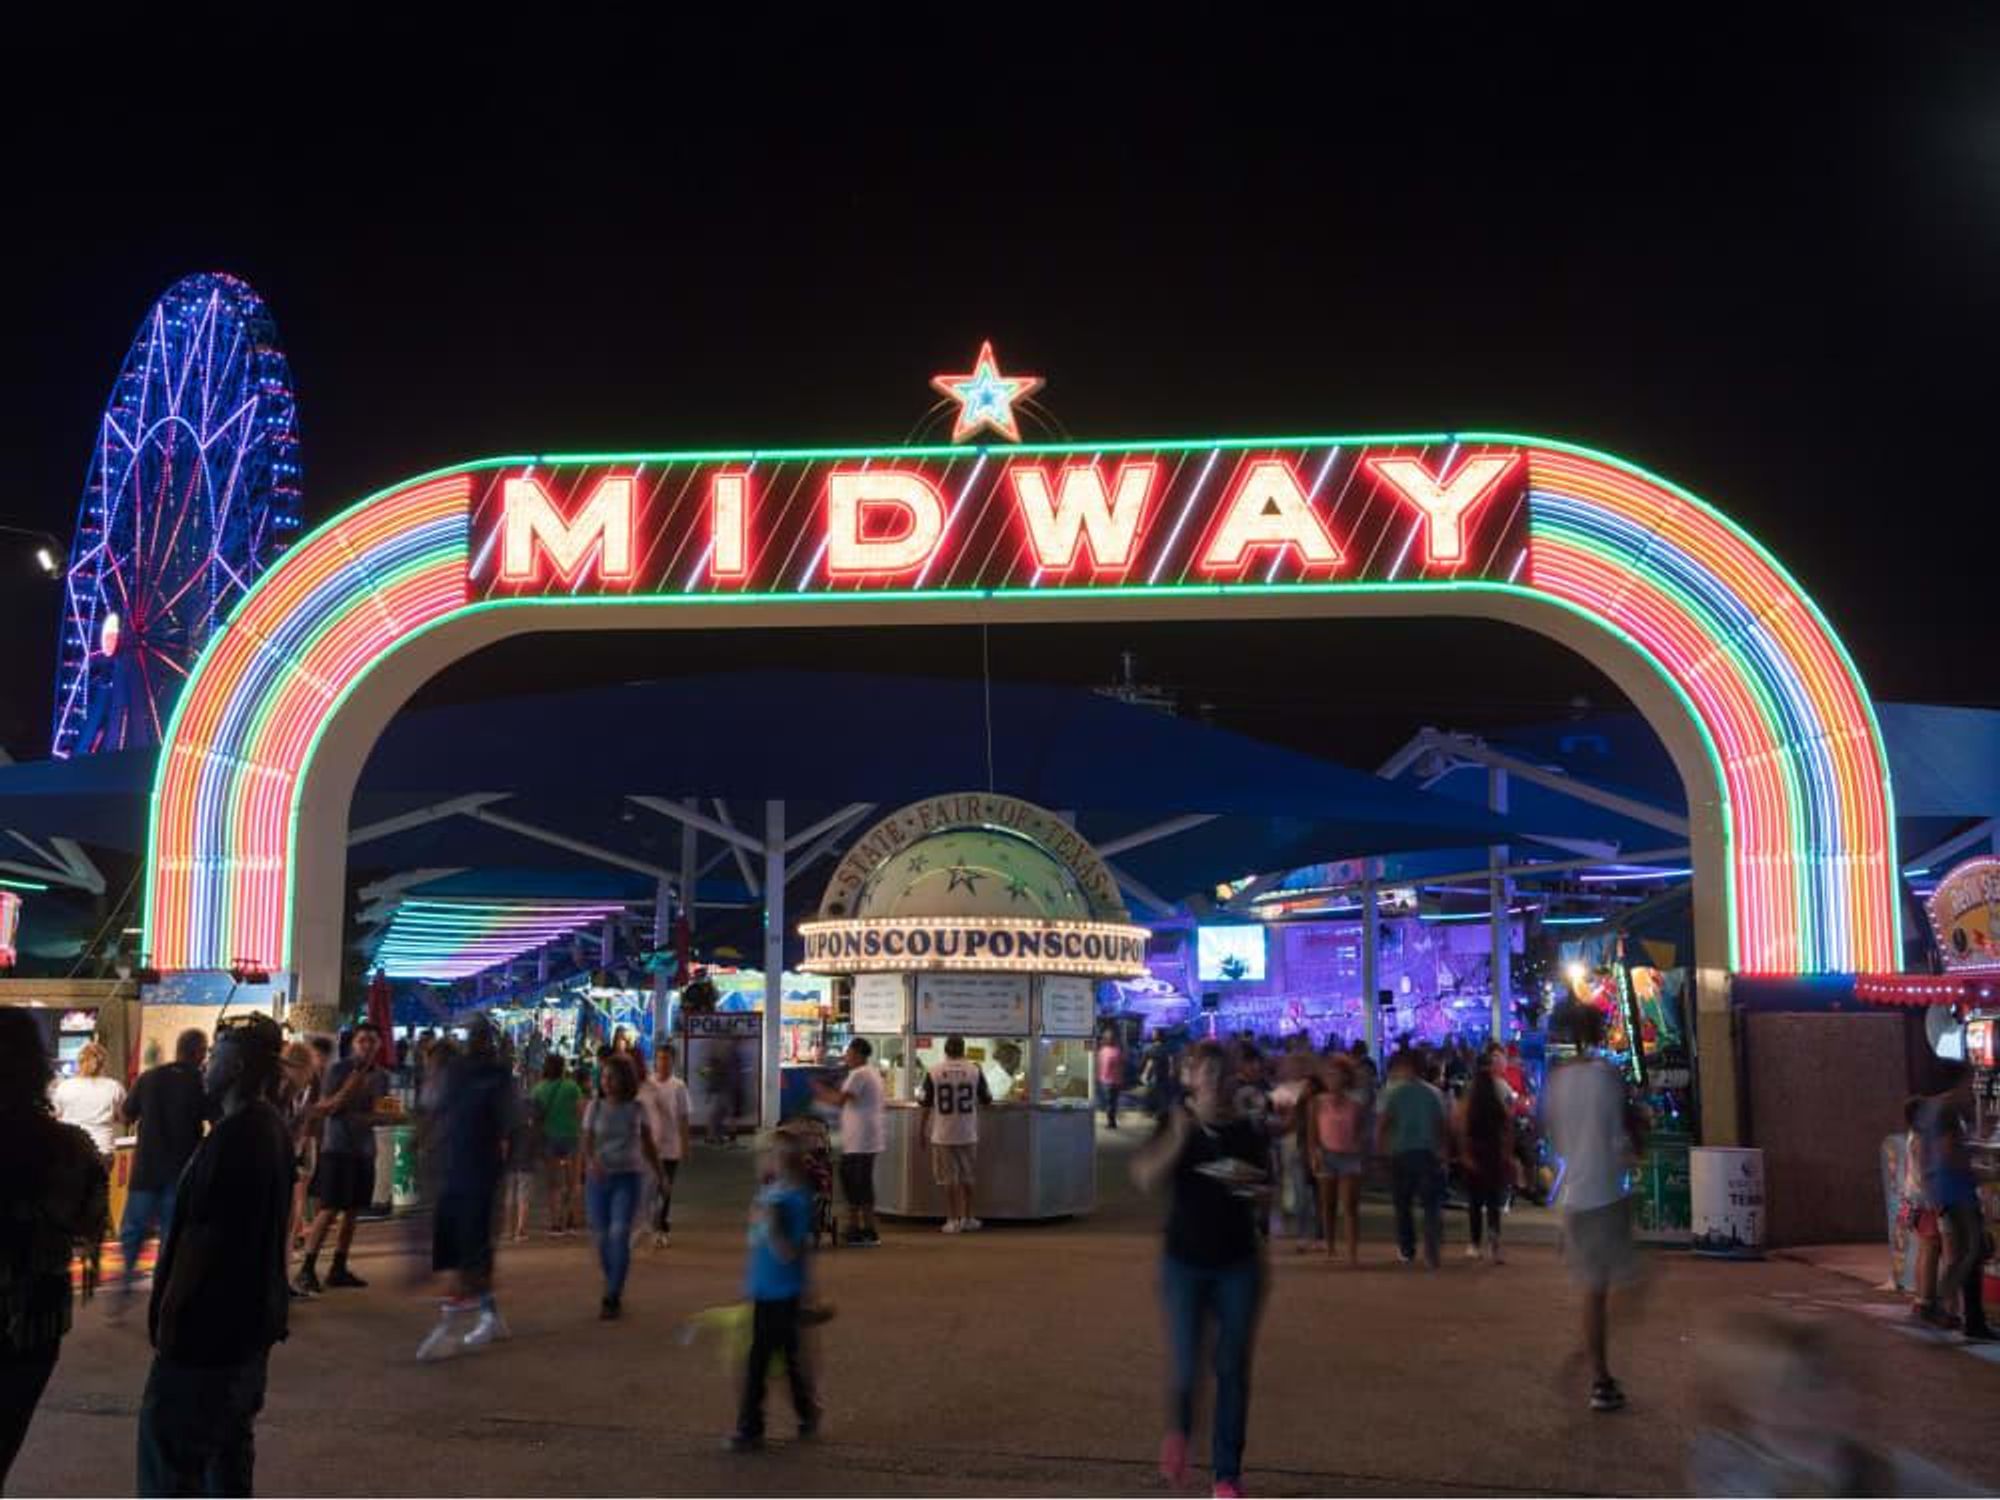 Midway at the State Fair of Texas